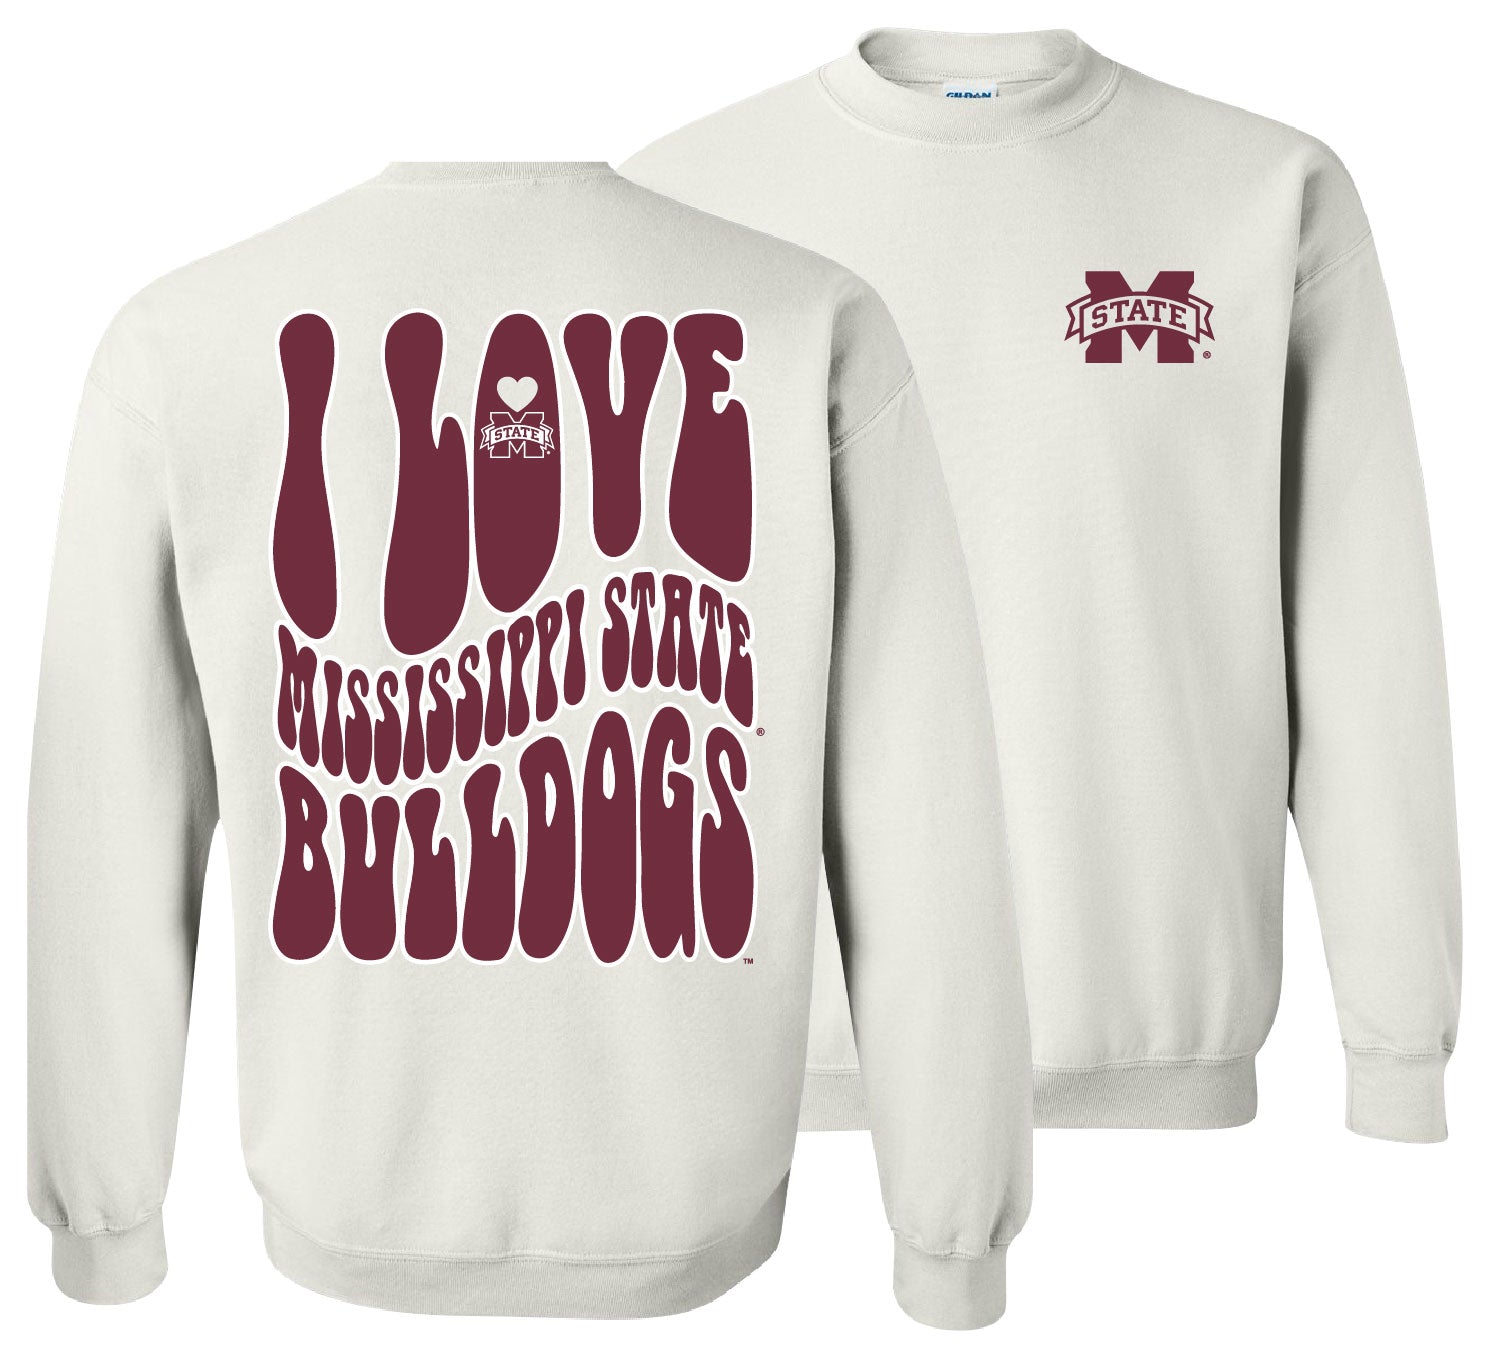 Women's College Shirts - Get Mississippi State Shirts | Girlie Girl ...